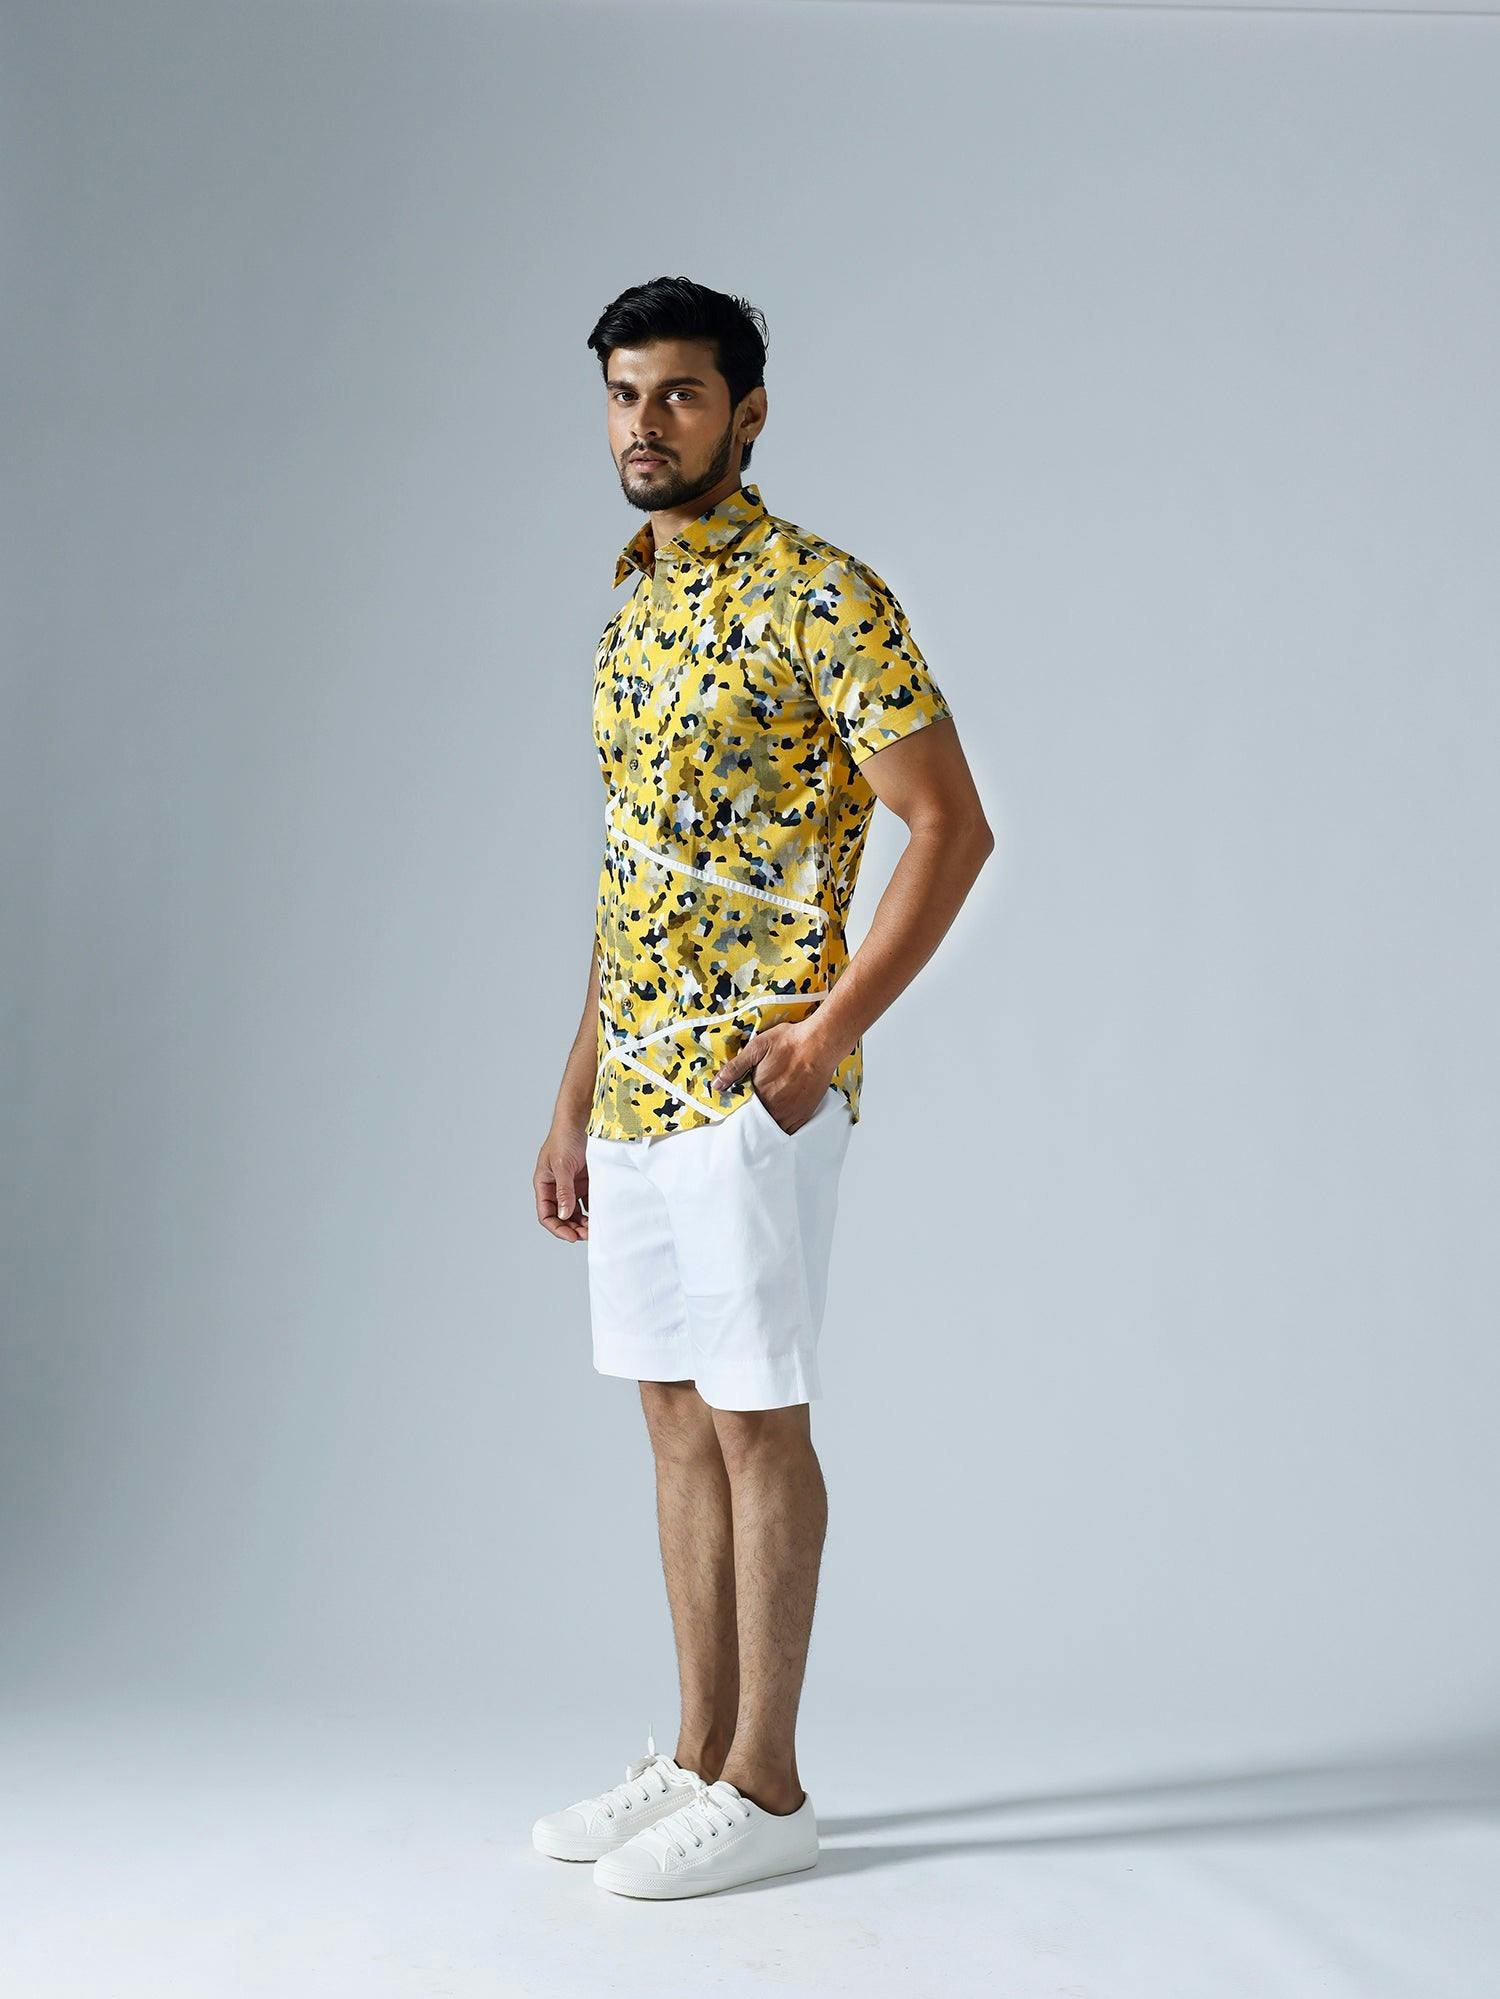 Thumbnail preview #1 for Pixelated Yellow Half sleeves Shirt With White Shorts